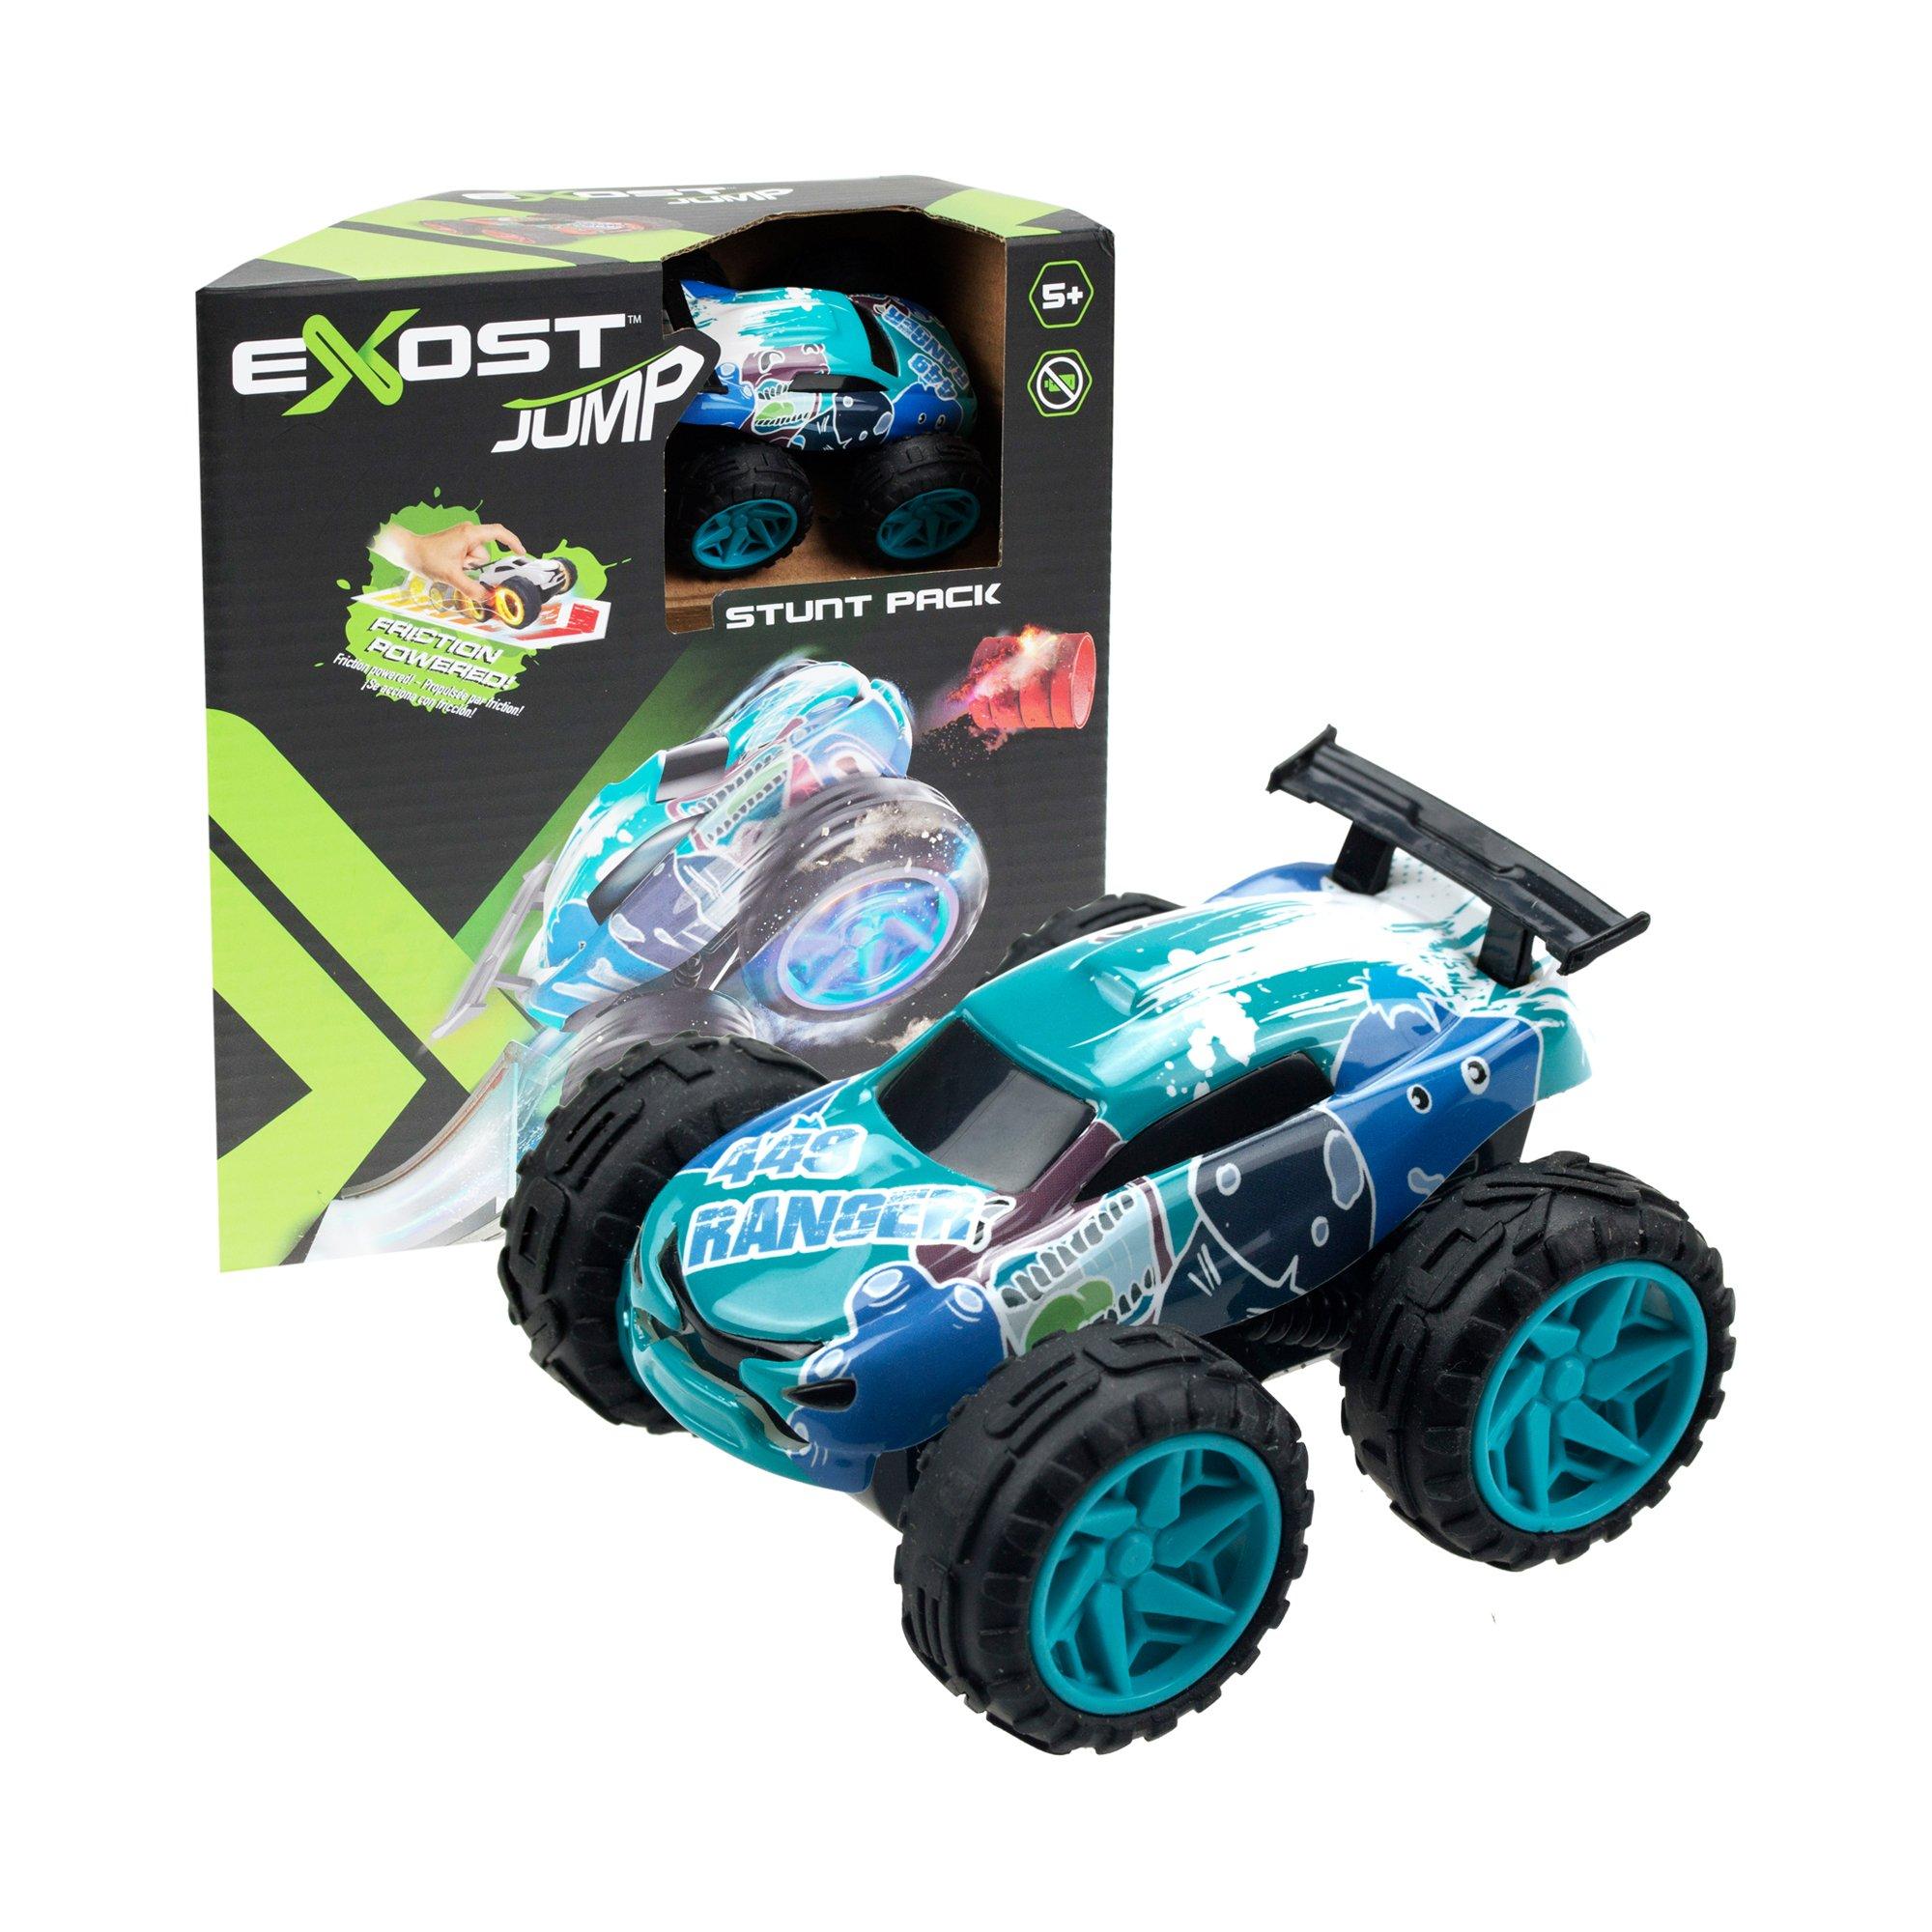 Image of EXOST Exost Jump Friction Car Playset, Zufallsauswahl